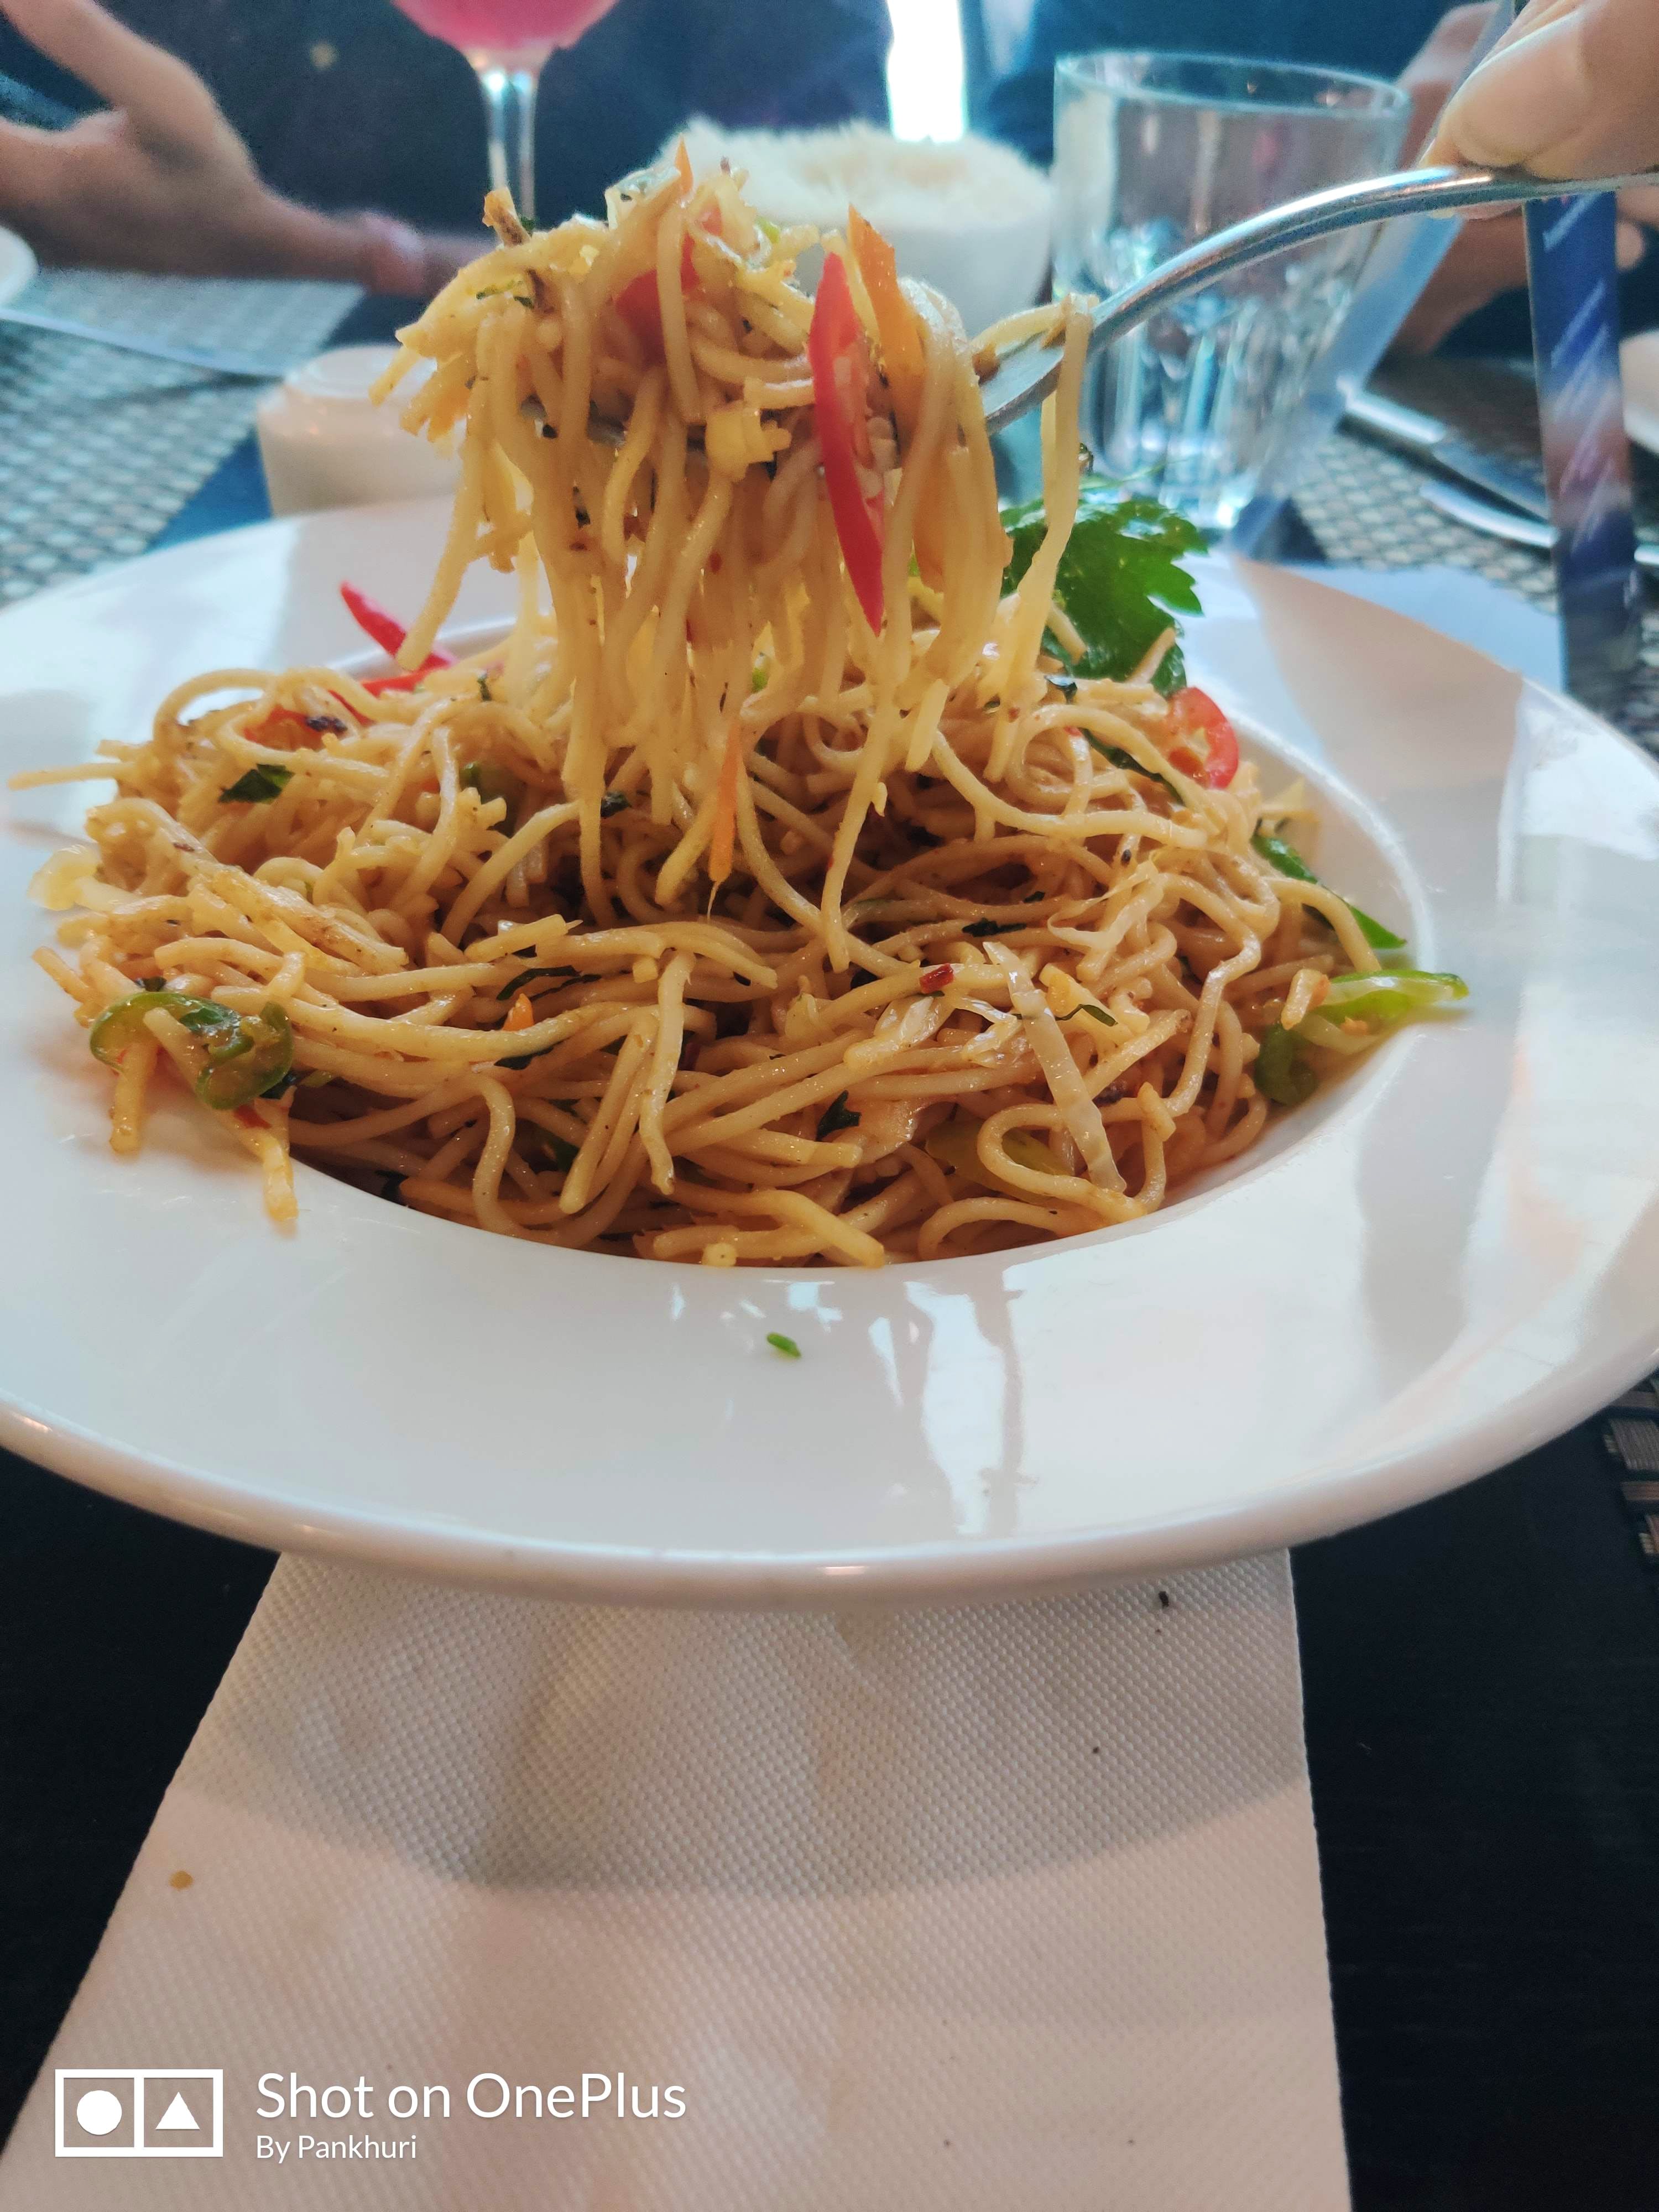 Dish,Cuisine,Food,Spaghetti,Chow mein,Ingredient,Noodle,Pancit,Fried noodles,Italian food